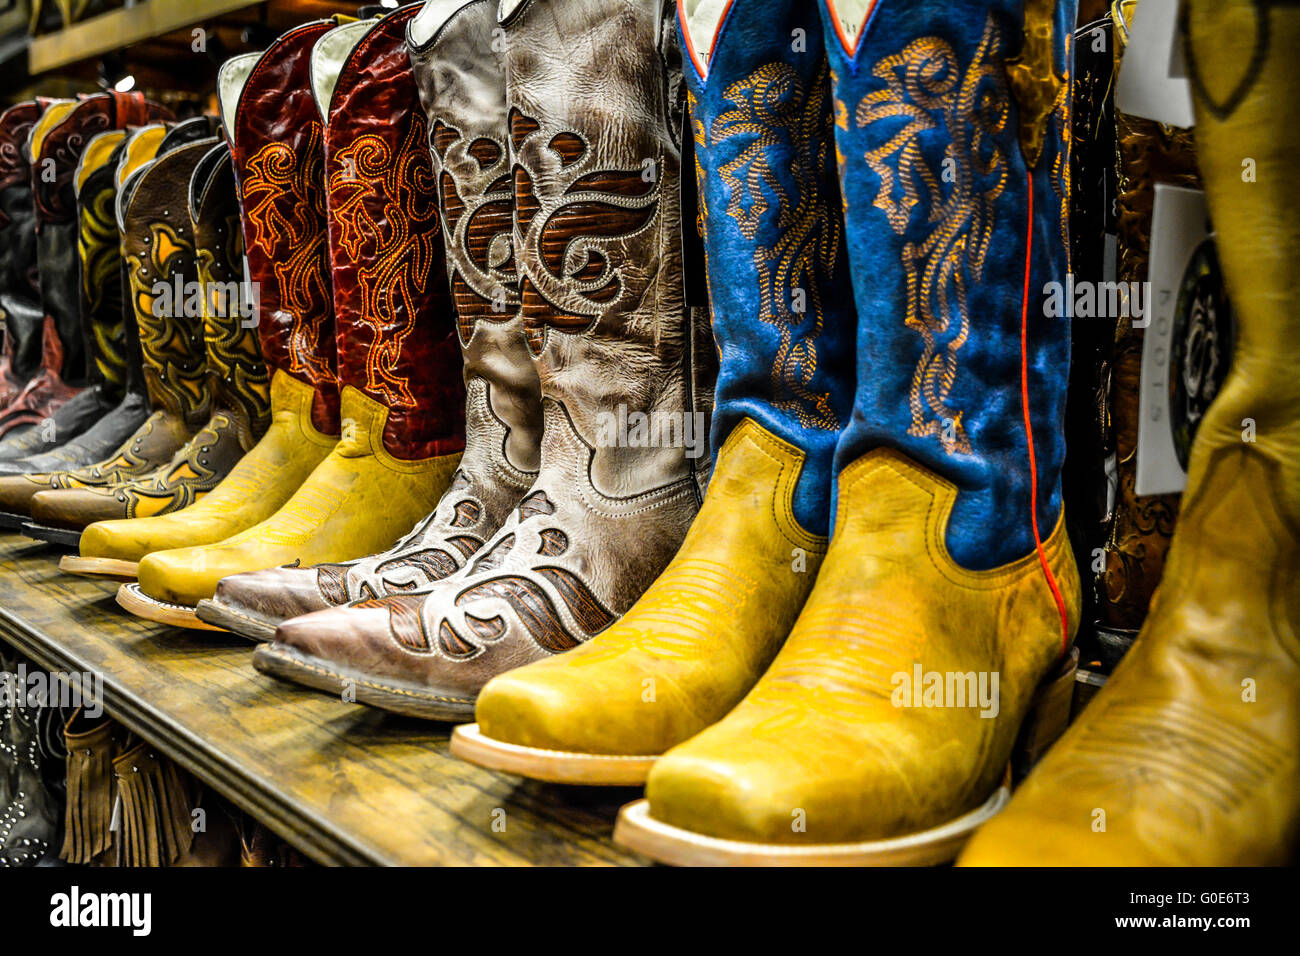 The Nashville Cowboy boot store has rows of unique Cowboy boots for sale in the downtown entertainment district in Nashville TN Stock Photo